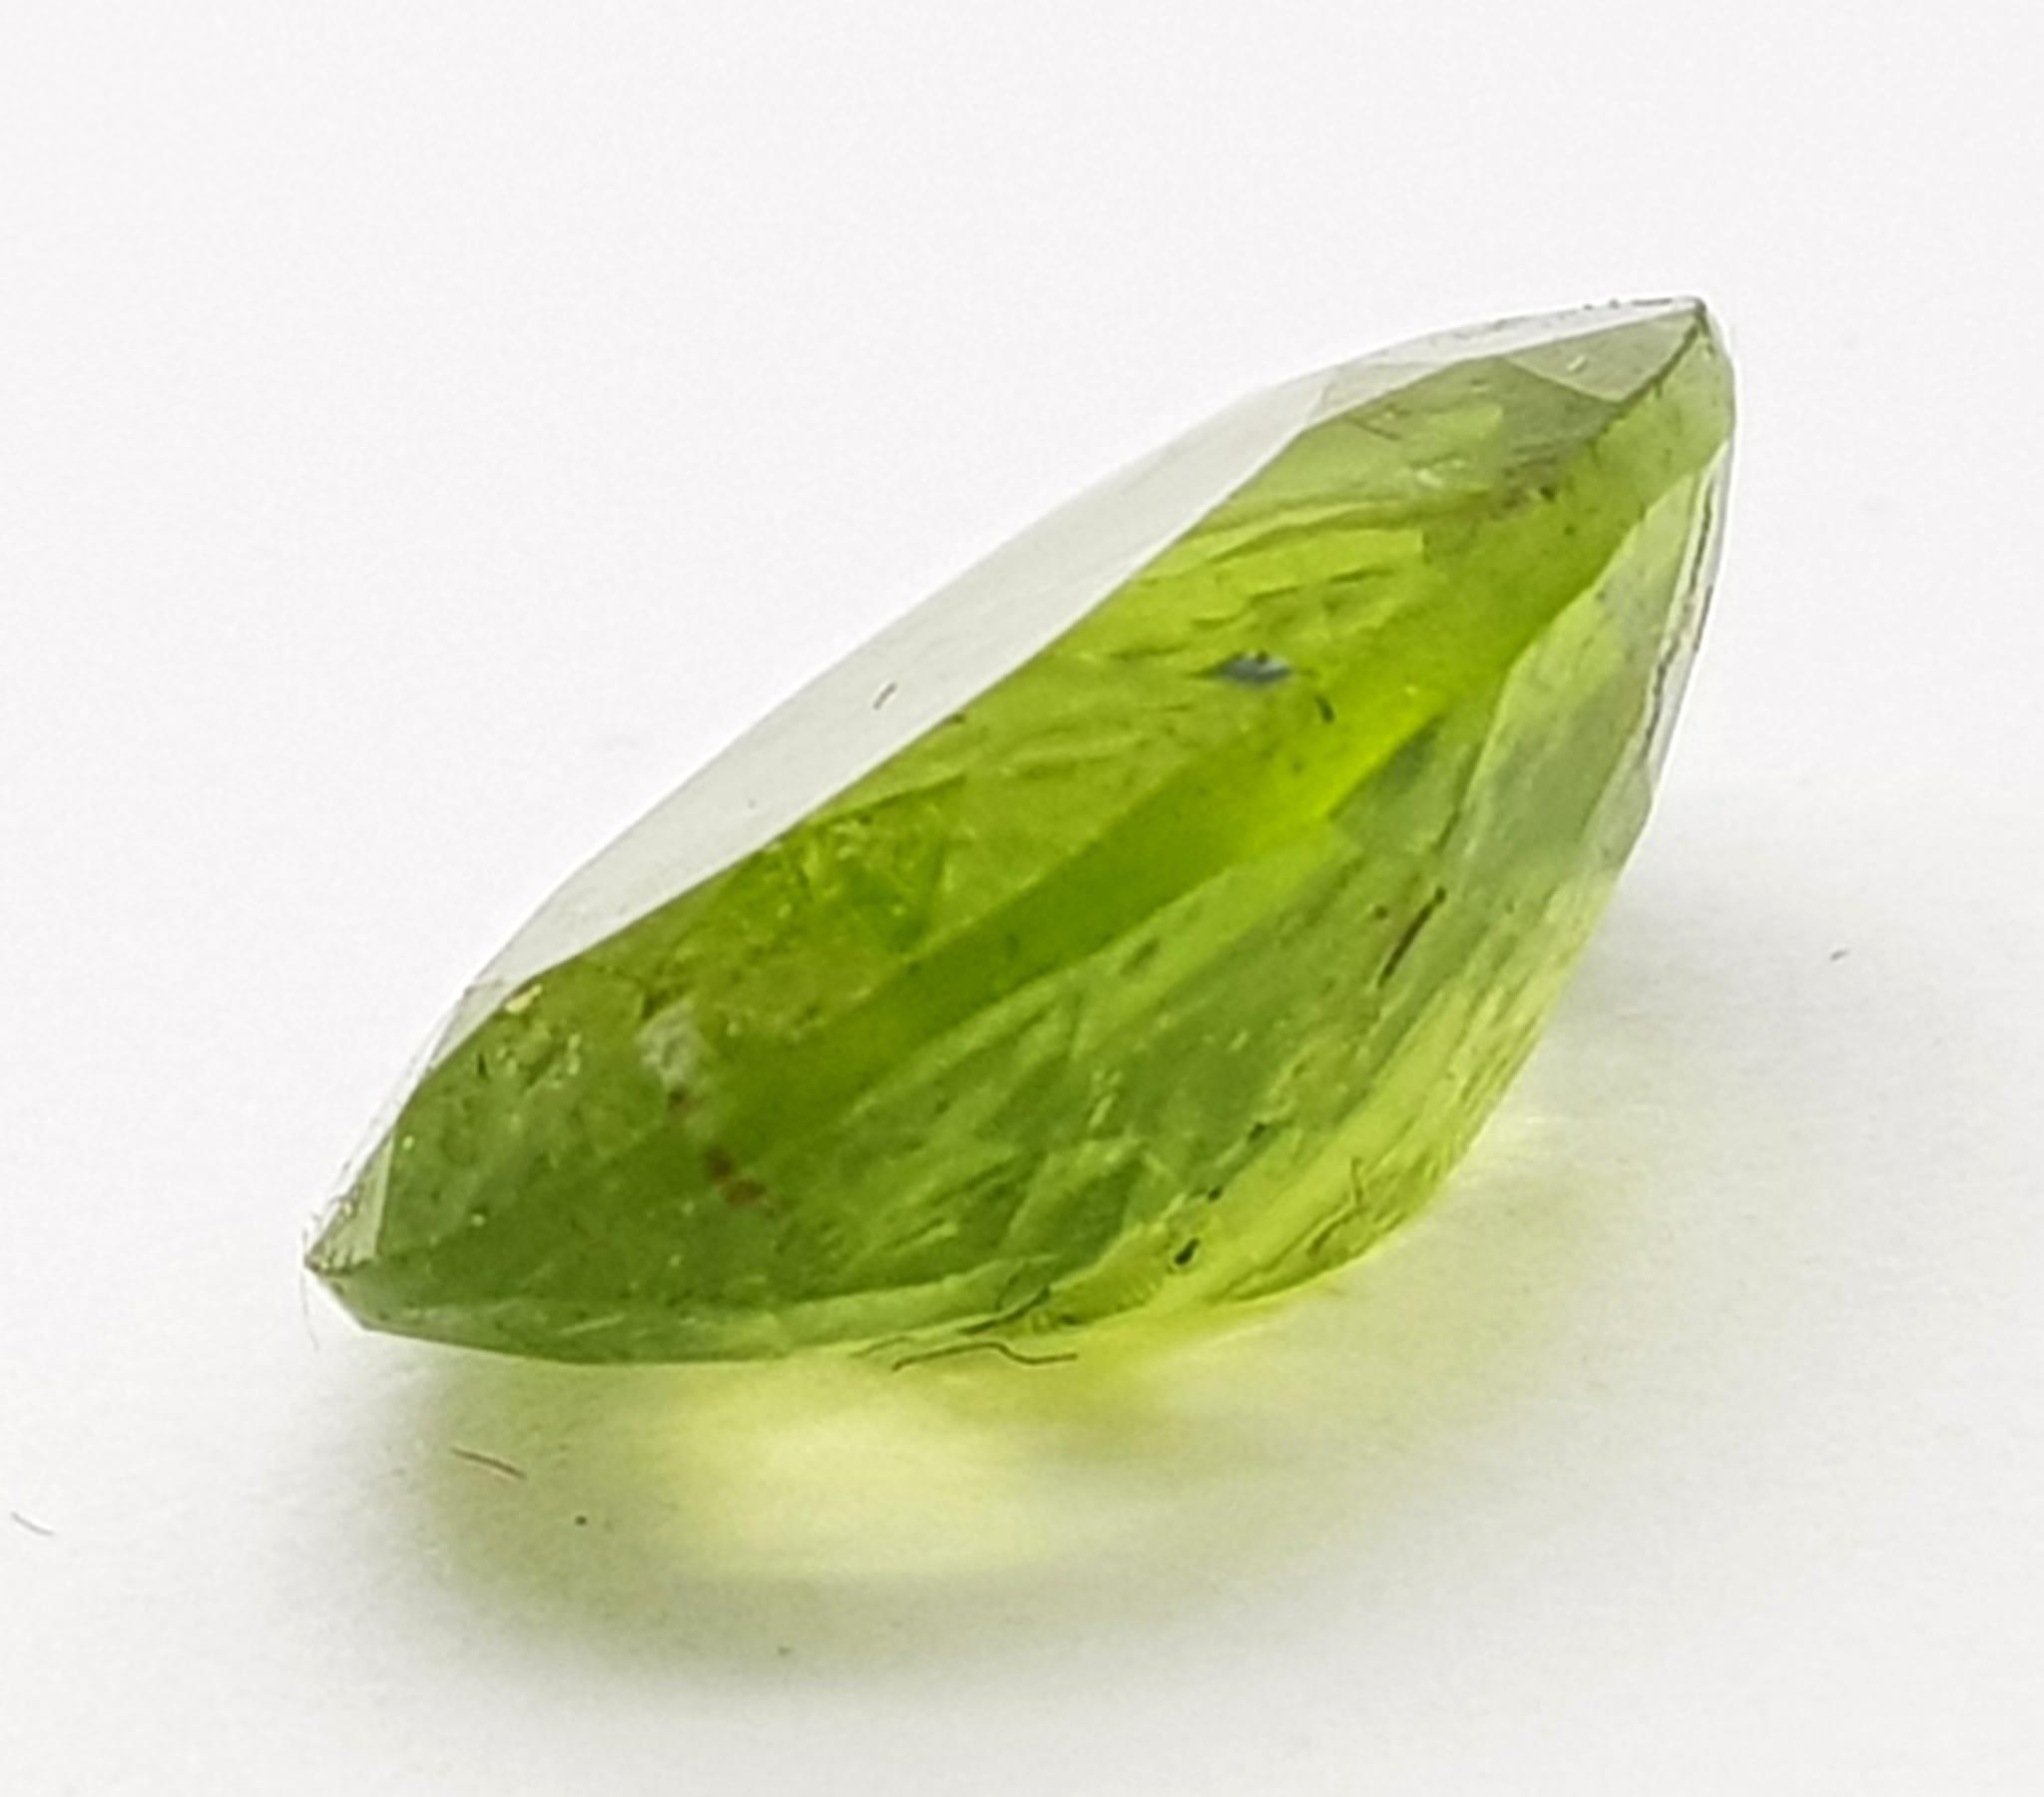 5.30 Ct Faceted Peridot. Olive Green. Oval Cut. Comes with GLI Certificate. - Image 3 of 5